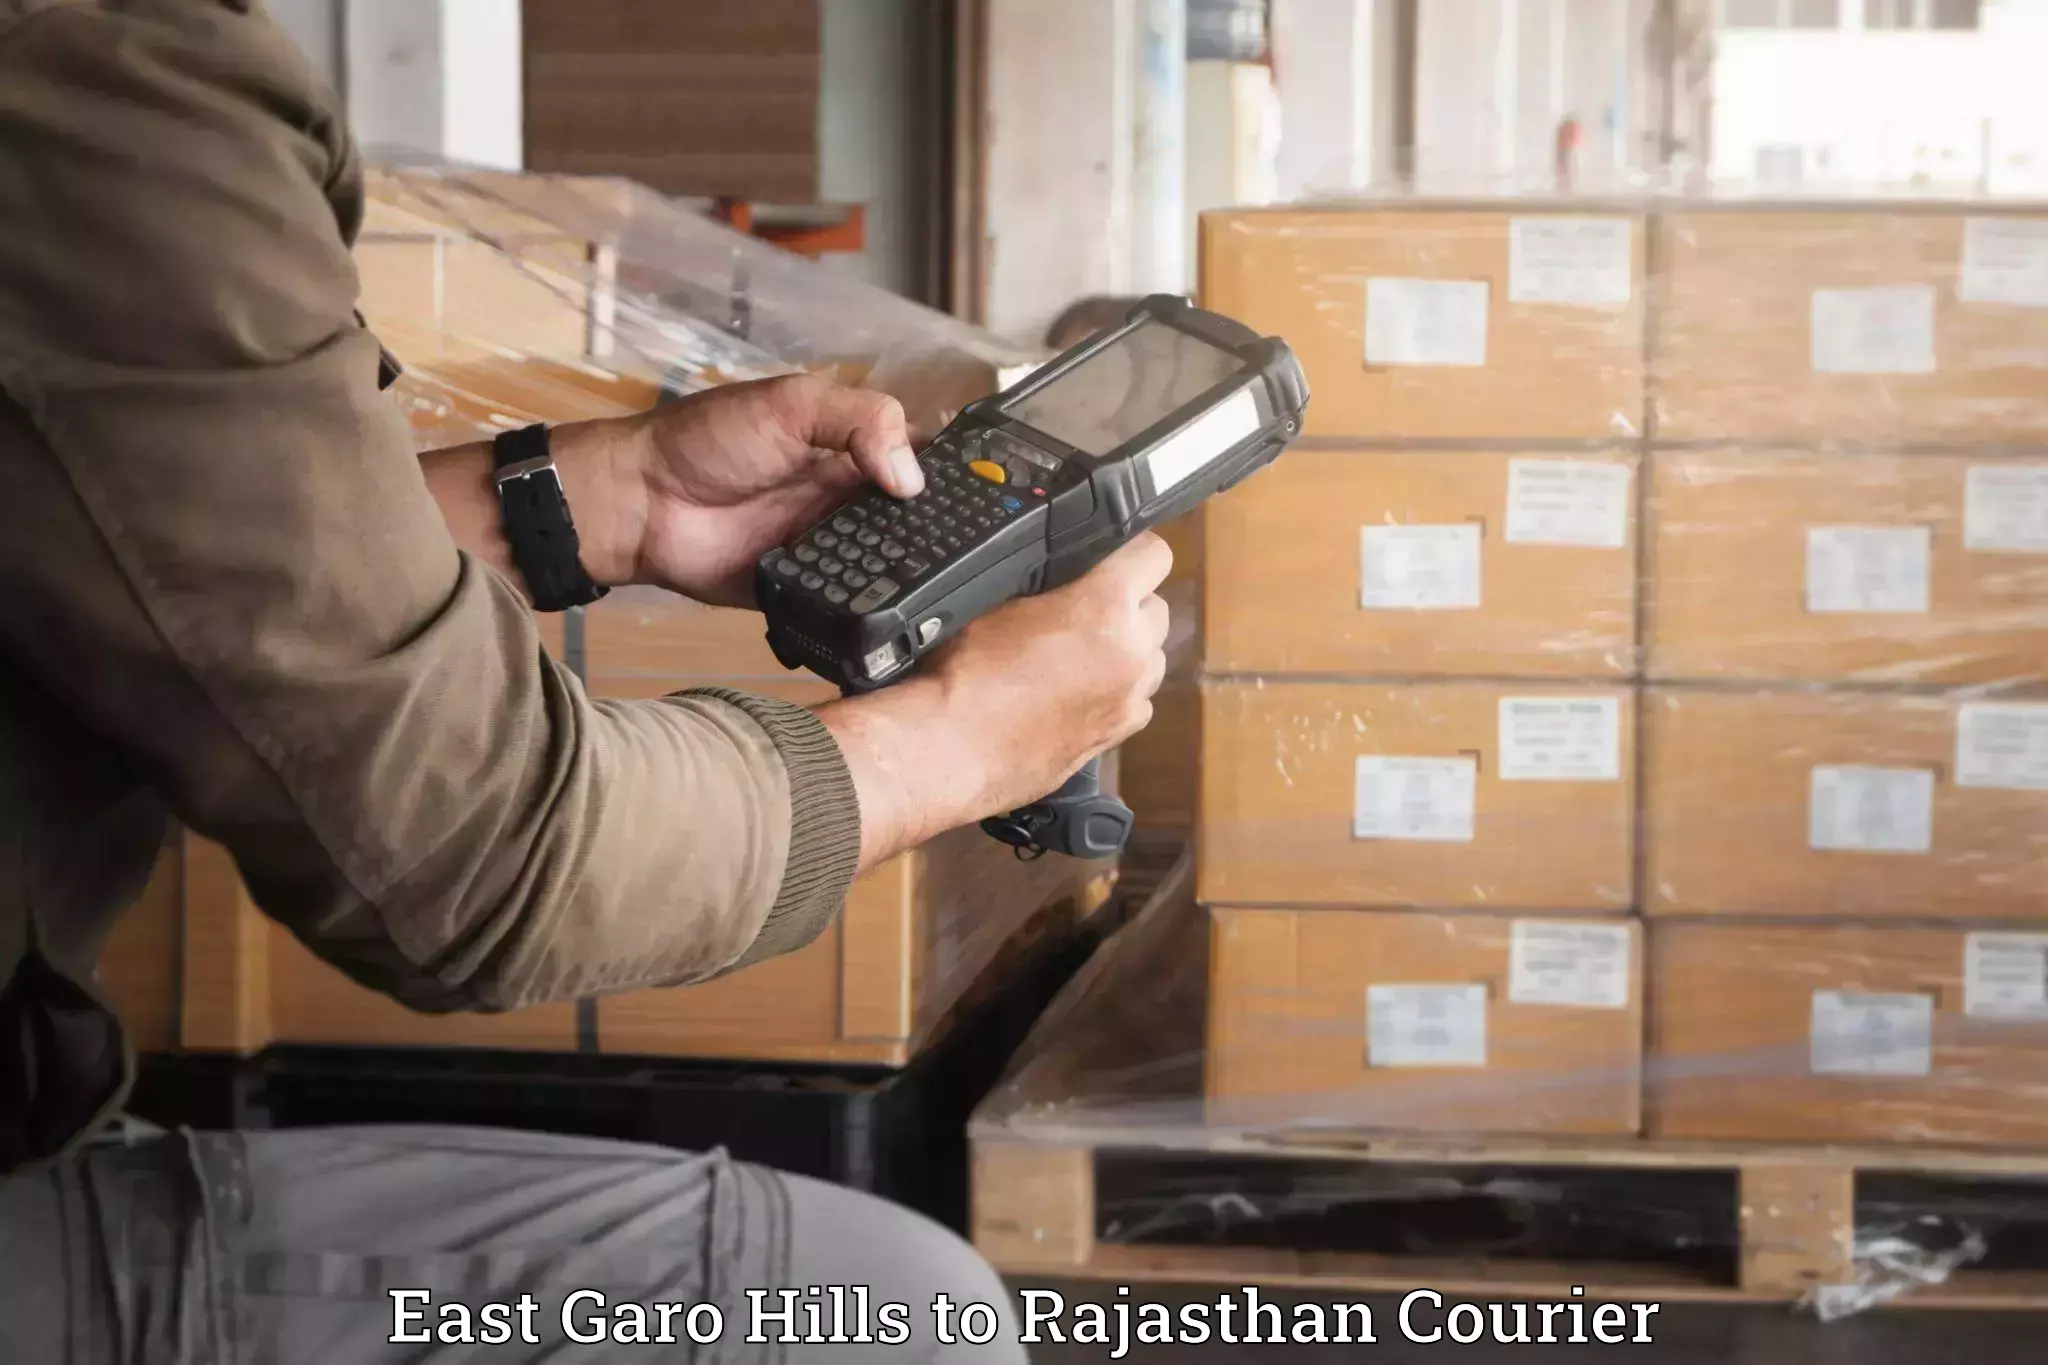 Luggage transport consultancy East Garo Hills to Rajasthan